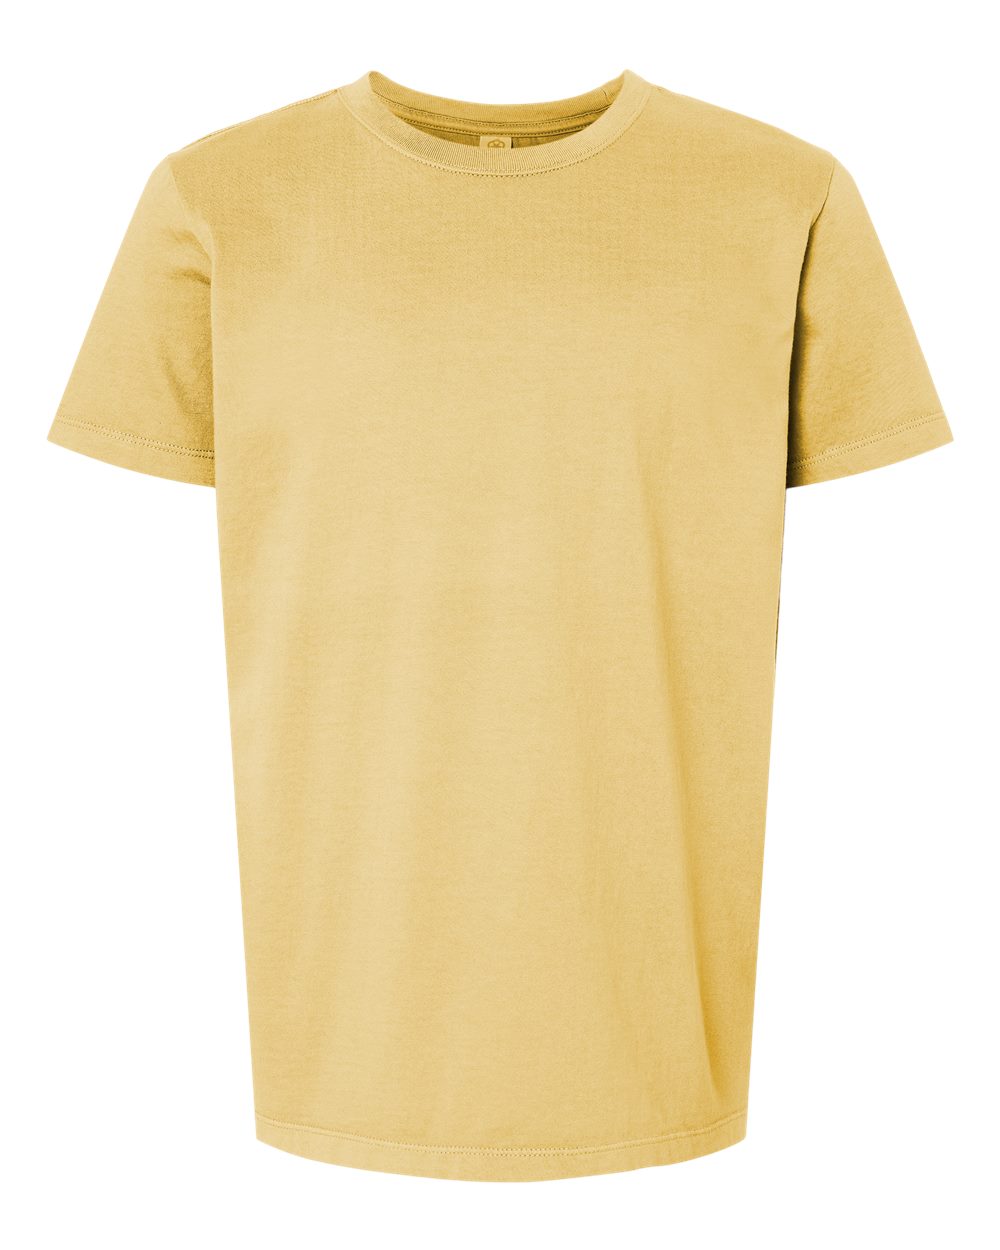 Softshirts® Youth Organic Cotton T-shirt in yellow